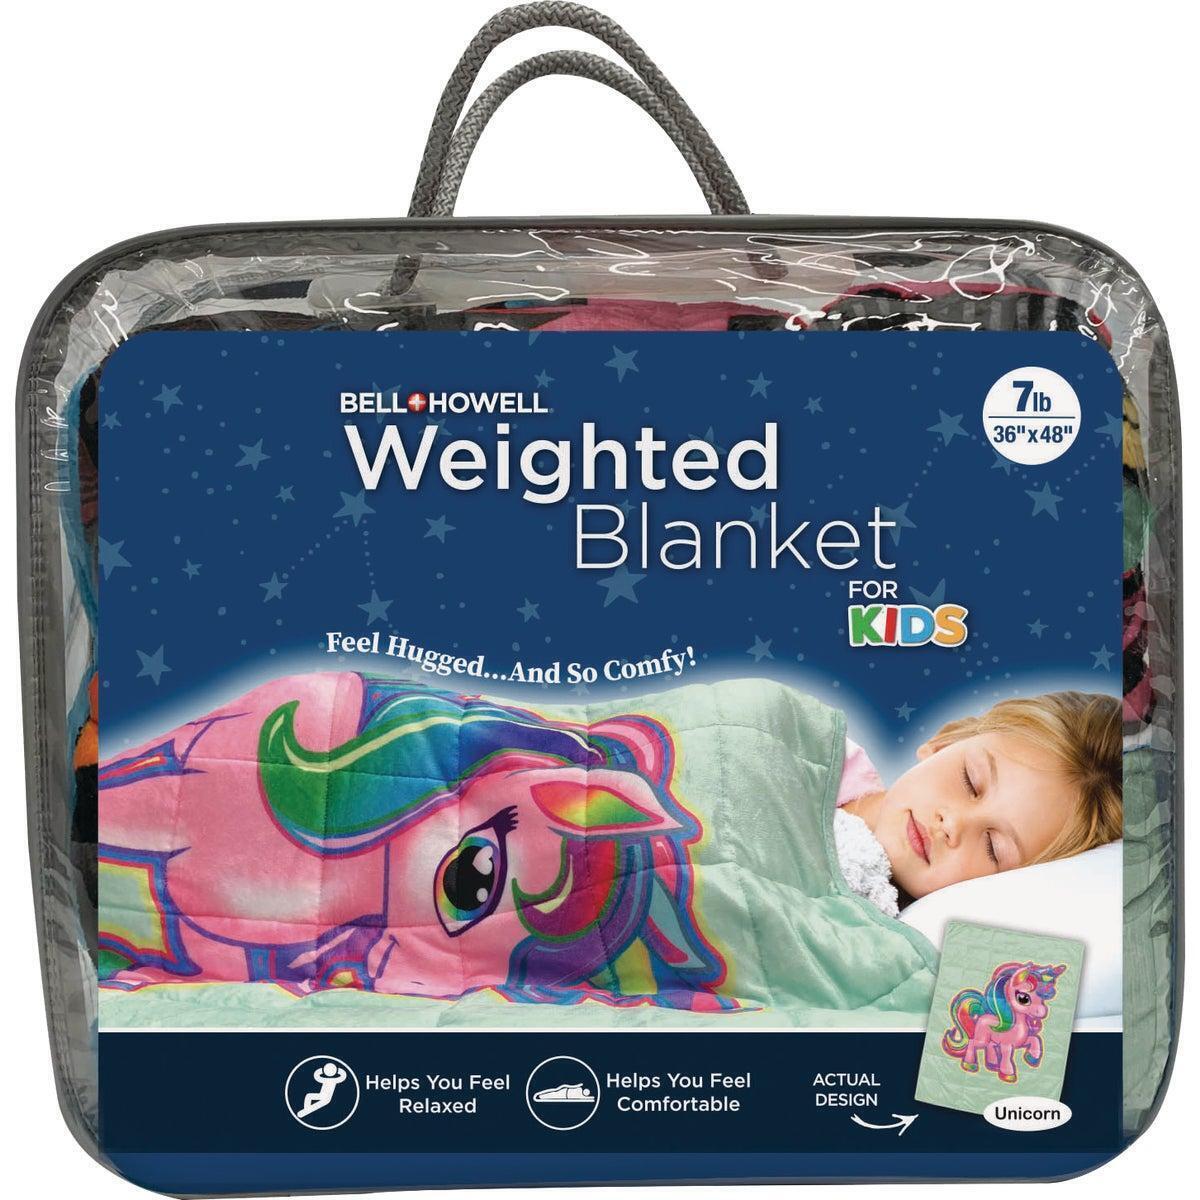 Bell+Howell Kids 7 Lb. Weighted Blanket- Unicorn 2822 Pack of 2